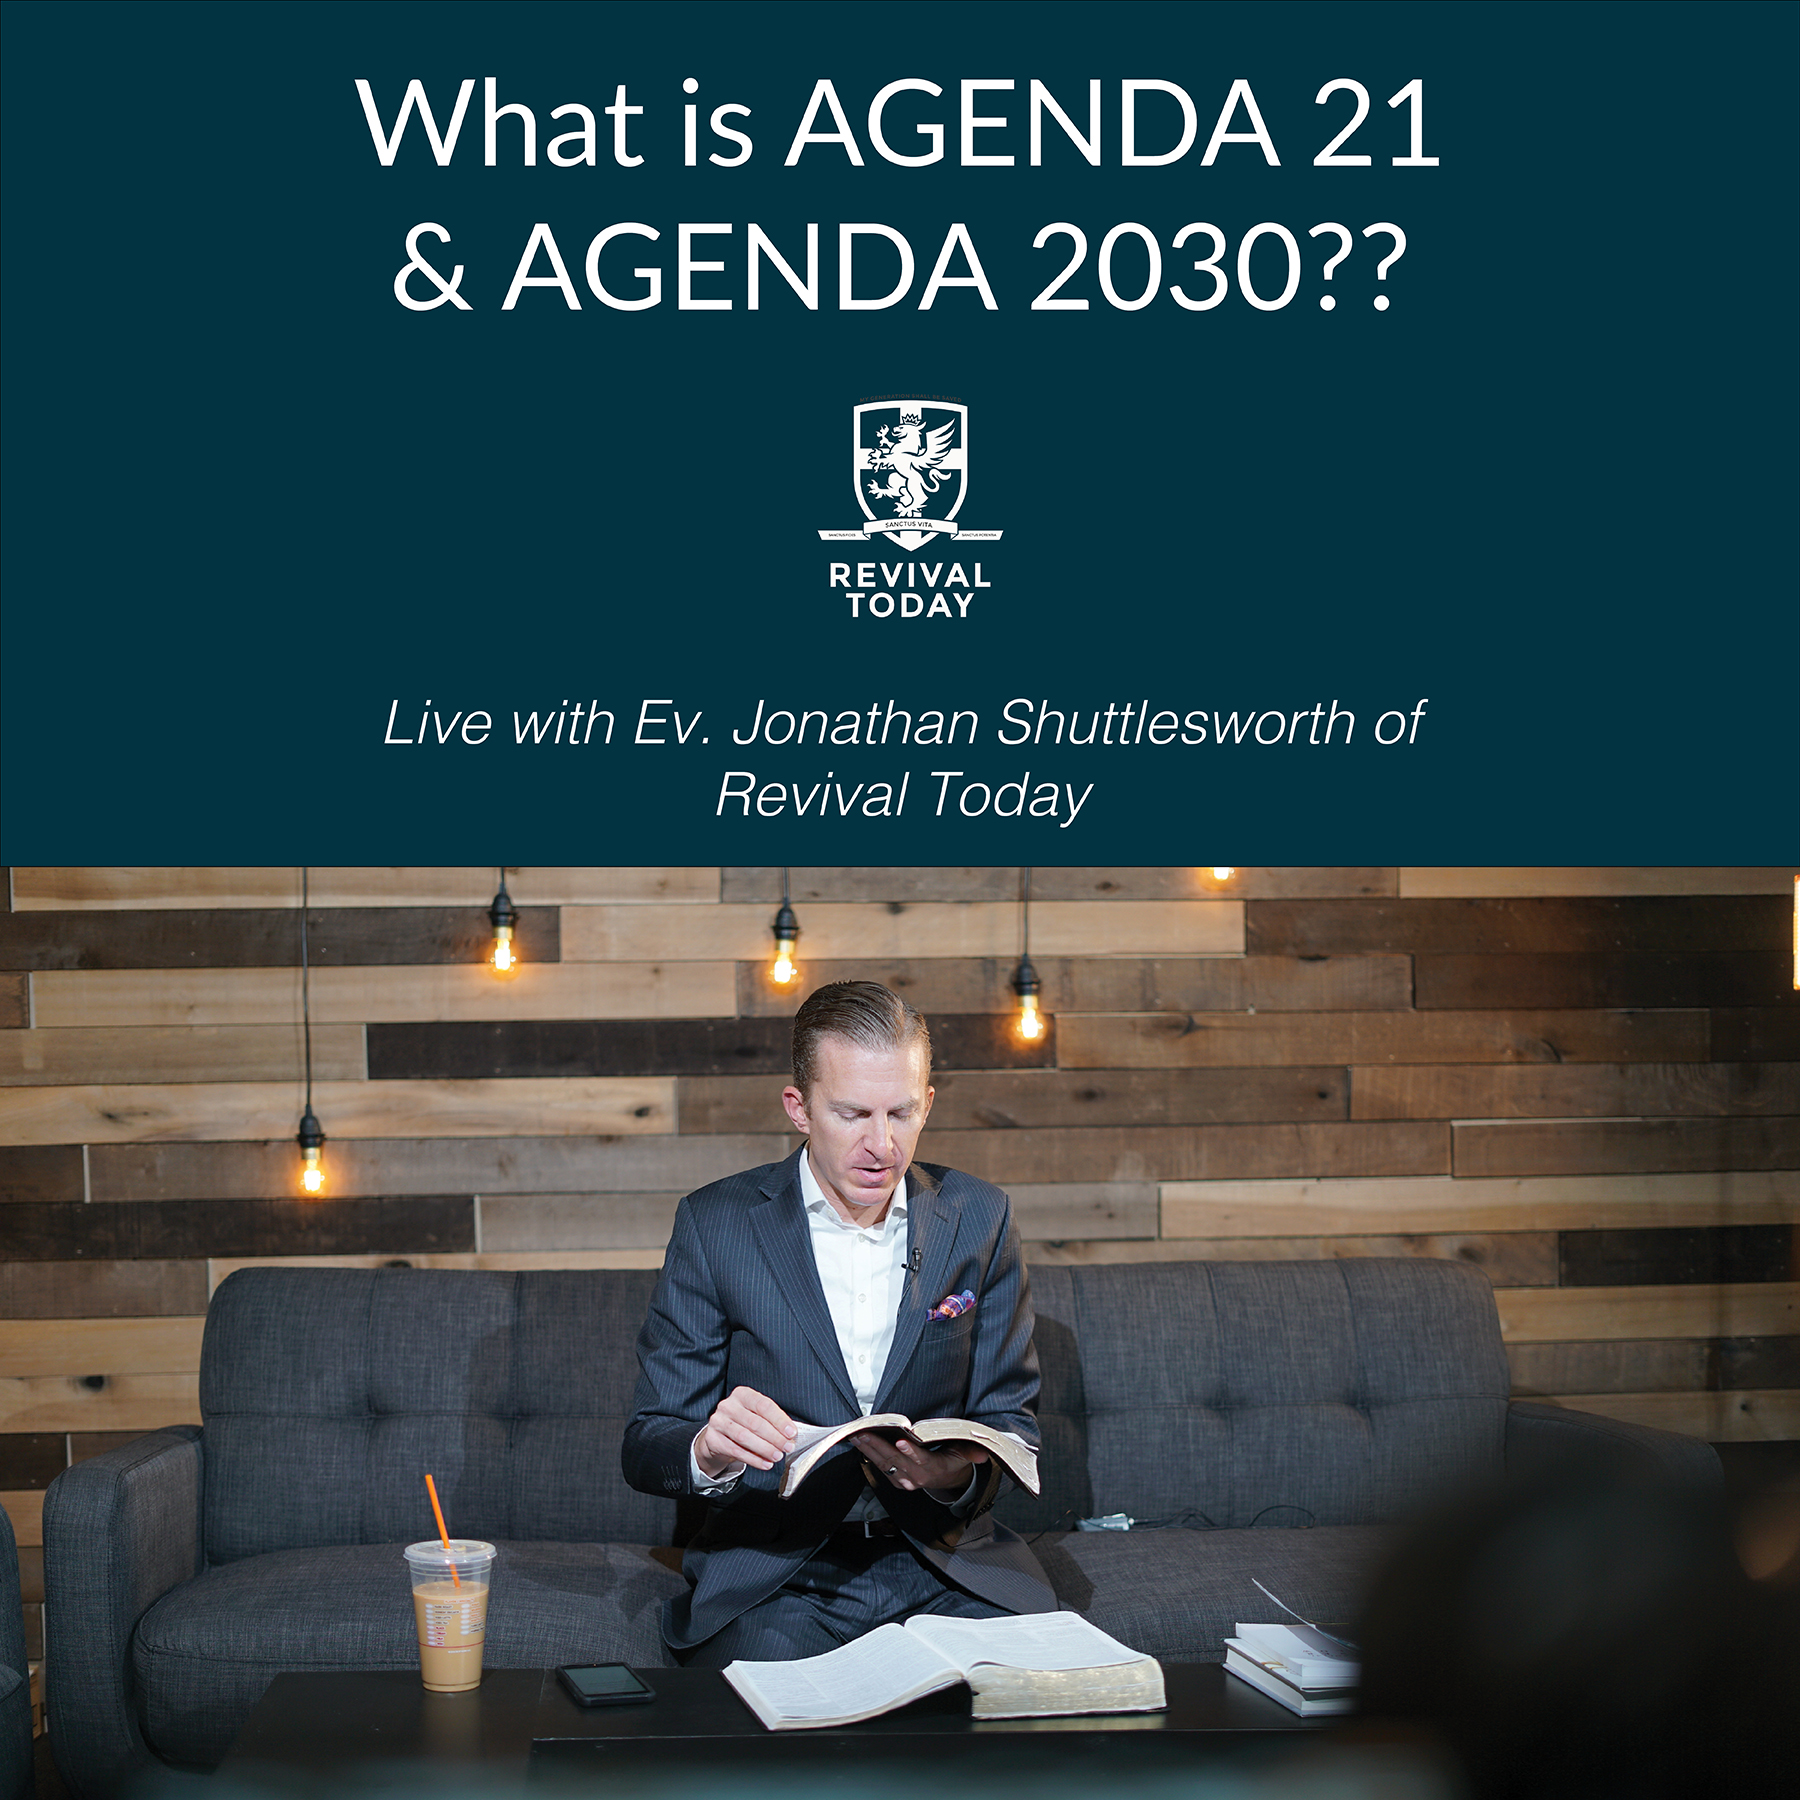 What is Agenda 21 and Agenda 2030